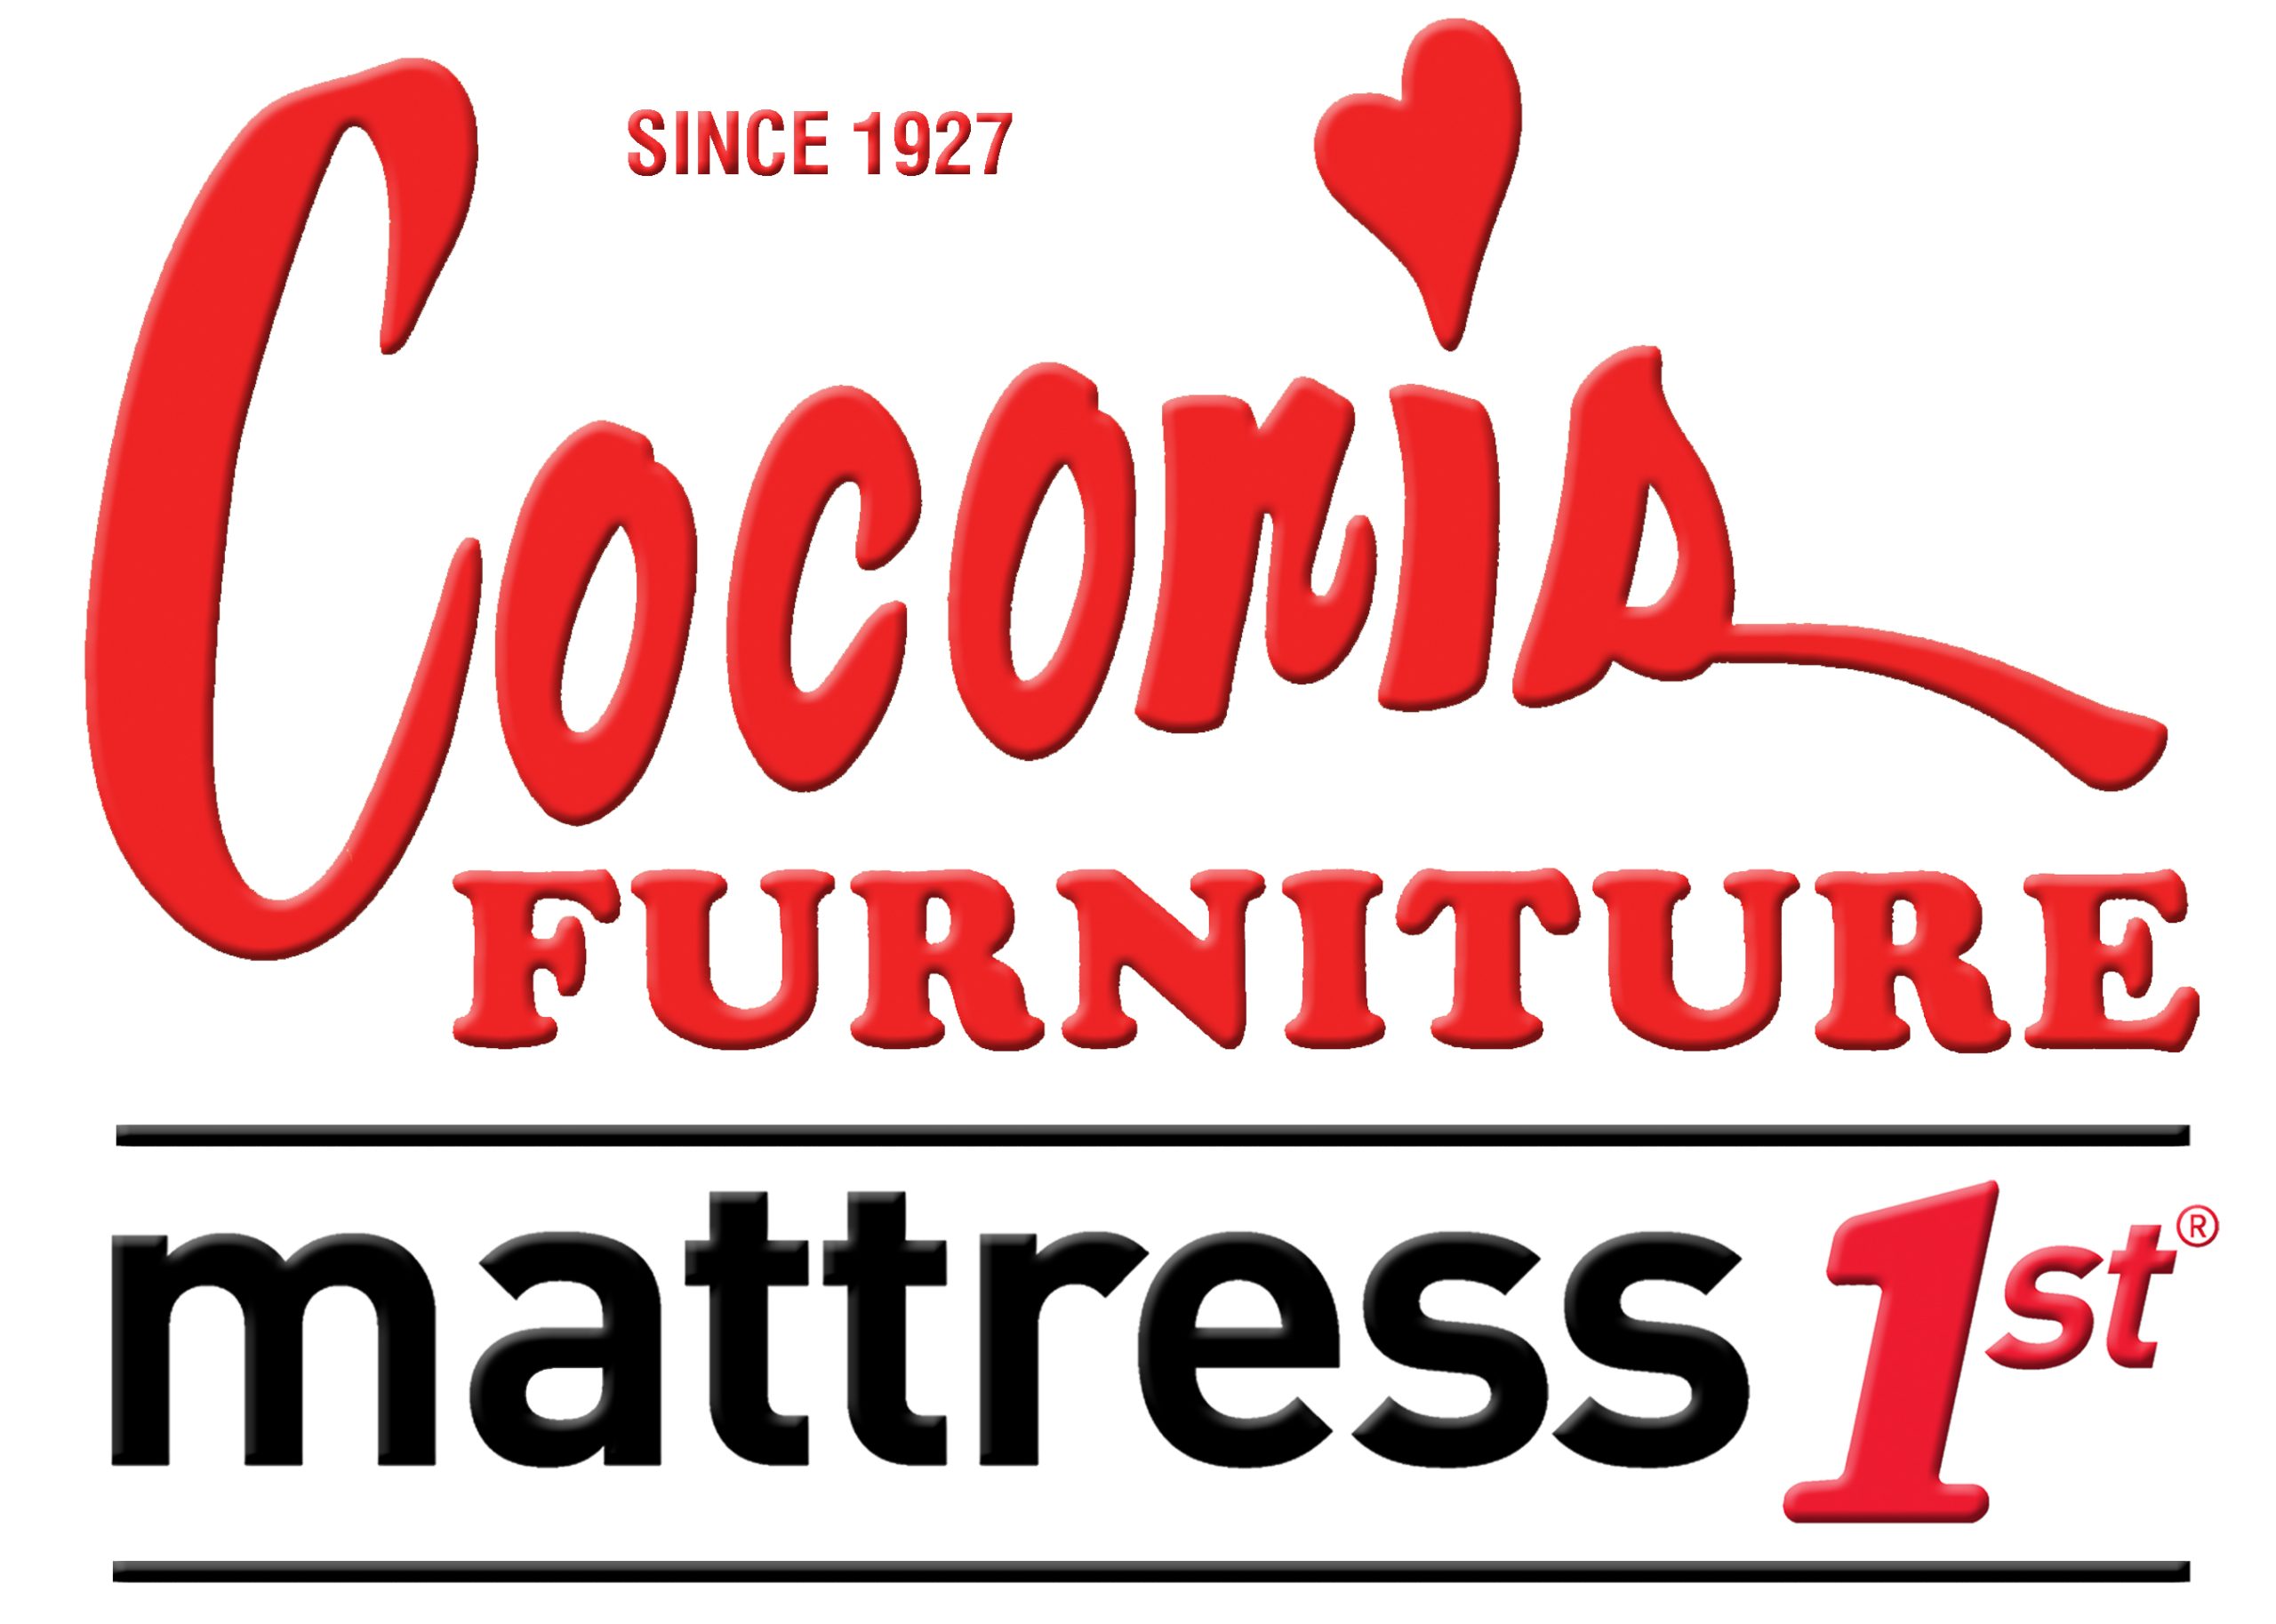 Recommendation for Coconis Furniture & Mattress 1st